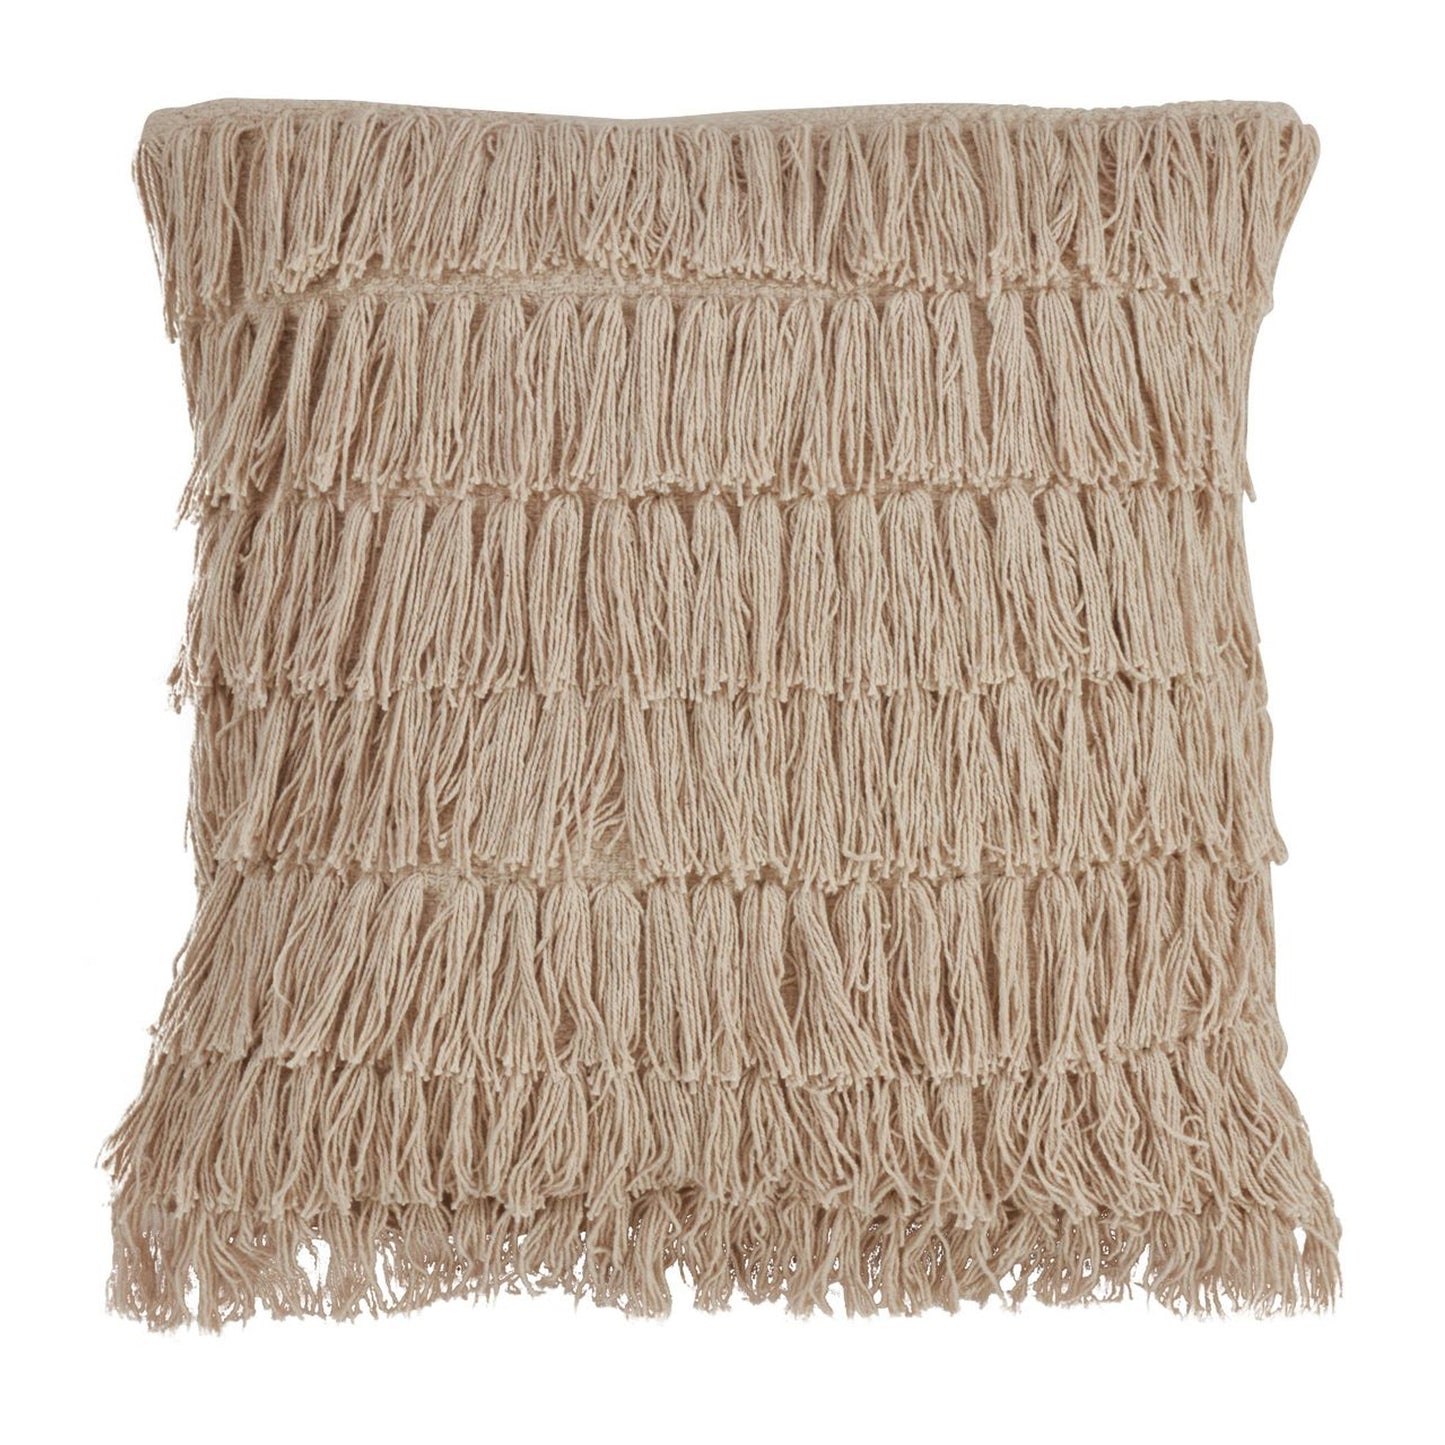 Woven Fringes Throw Pillow